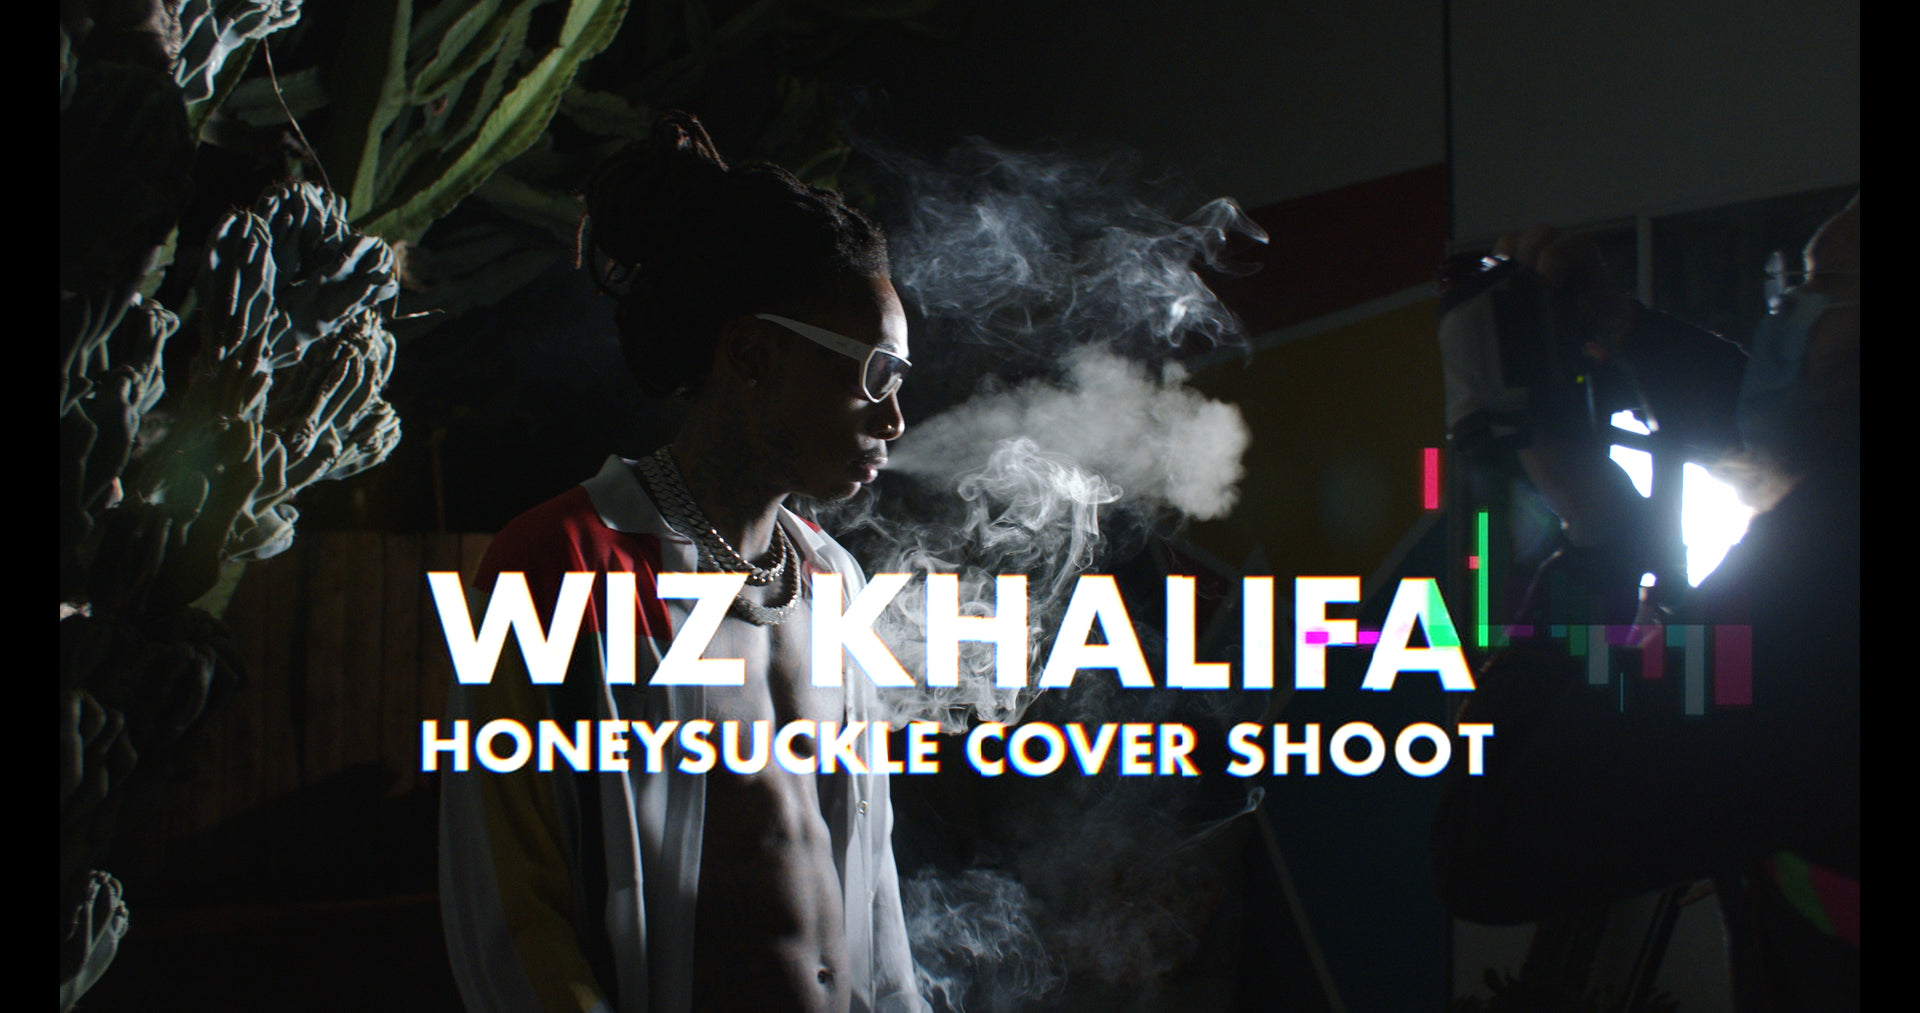 Load video: Wizzle got wings, Wizzle got everything! Join Honeysuckle Magazine for our cover shoot of WIZ KHALIFA! Our upcoming black history and women&#39;s history month edition features the King of Weed Rap himself: Wiz! Photographer Sam C Long shoots 1960&#39;s polaroids and digital.